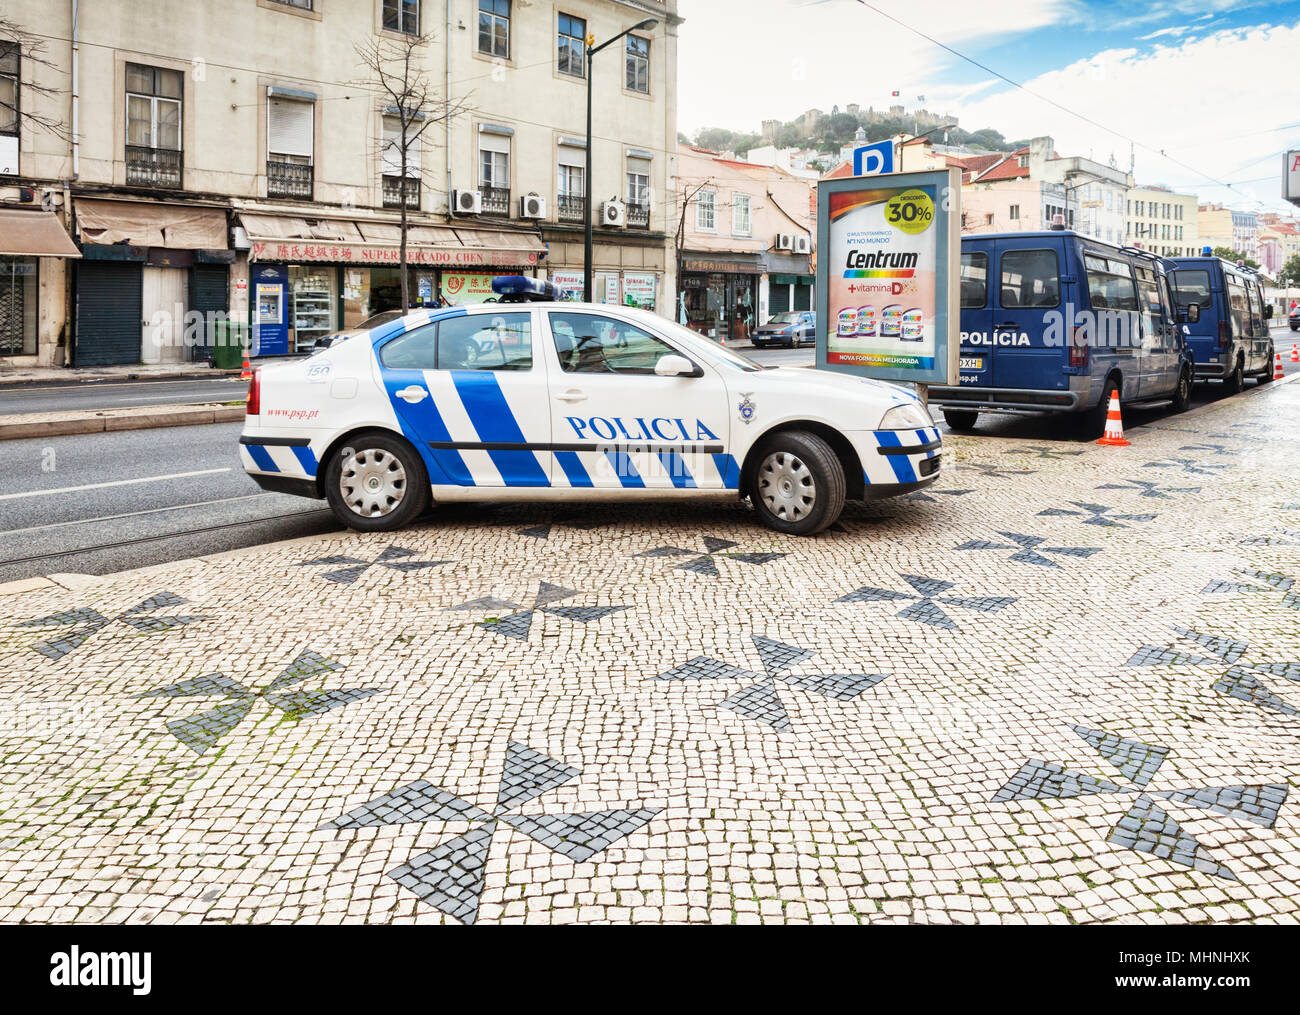 27 February 2018: Lisbon, Portugal - Police car and vans in Avenida Almirante Reis, also typical Portuguese Pavement. Stock Photo